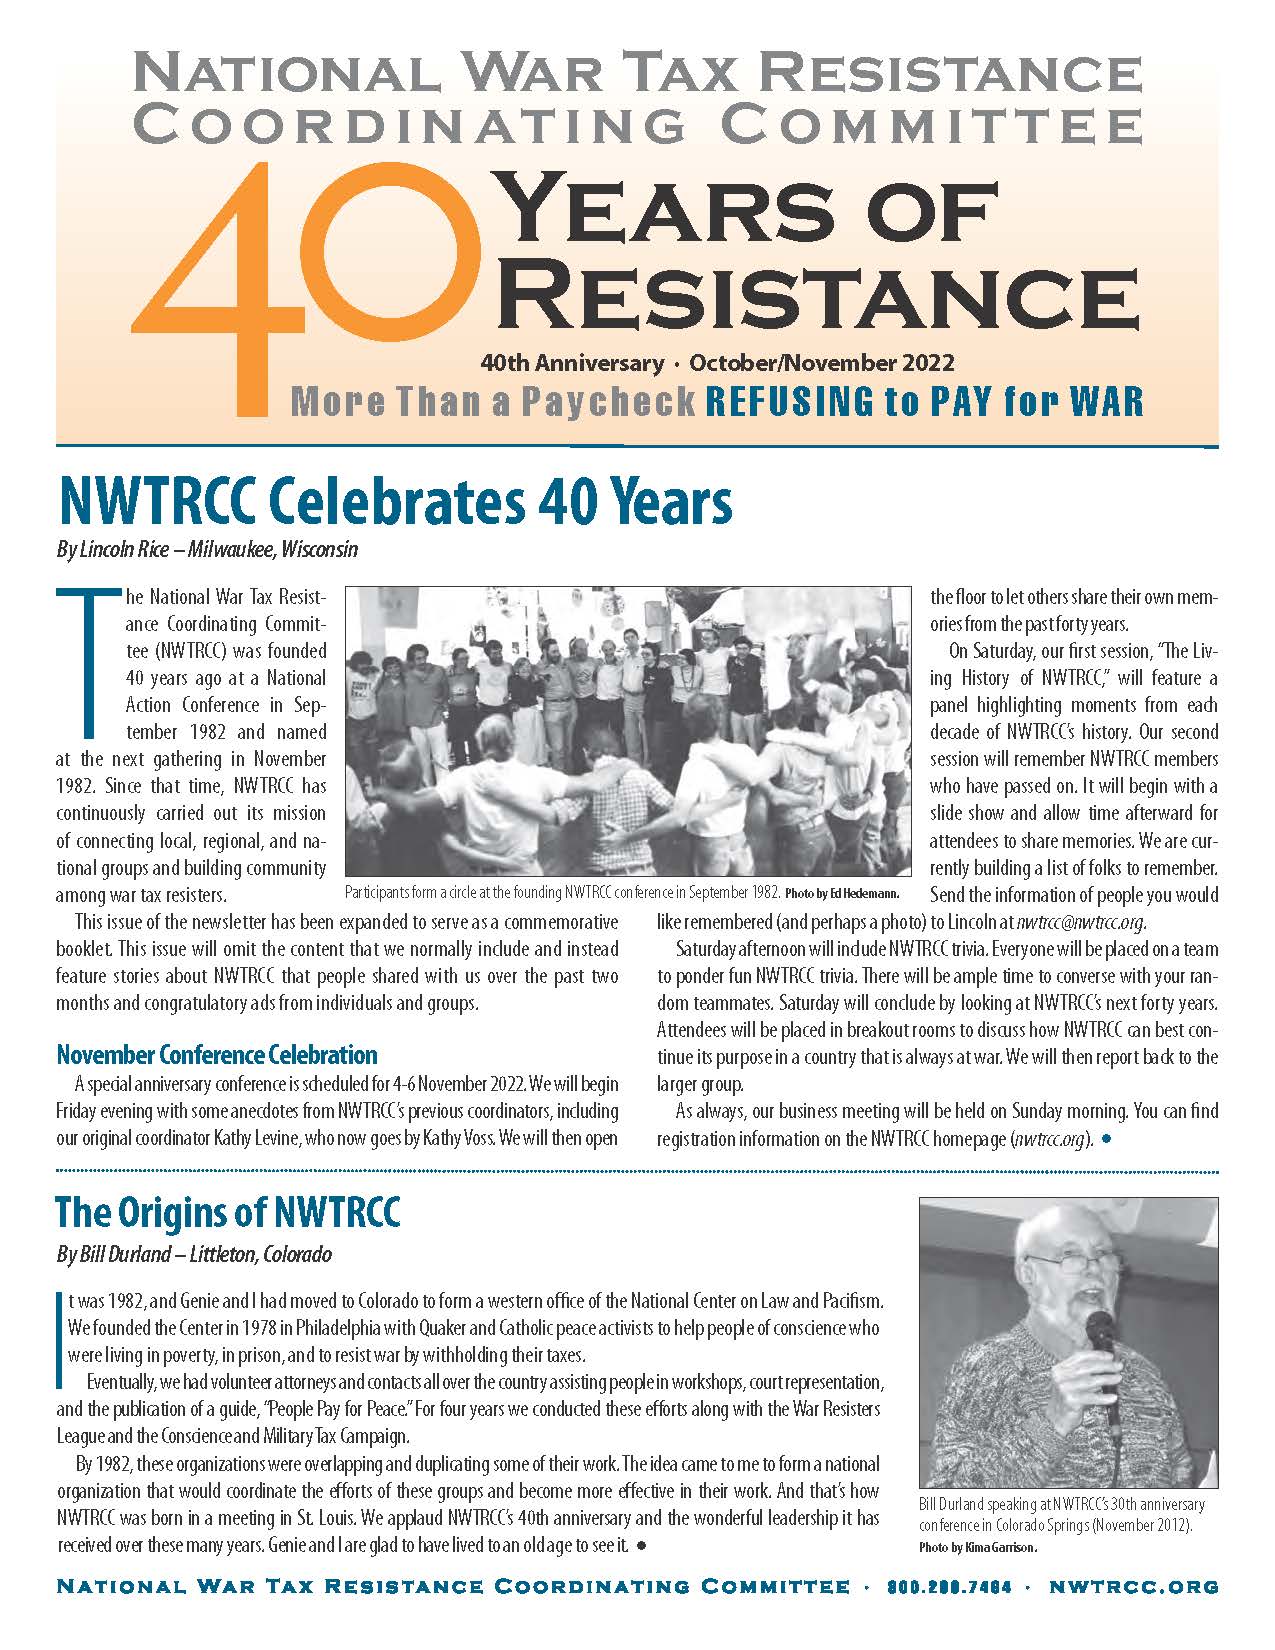 NWTRCC August 2021 Front Page